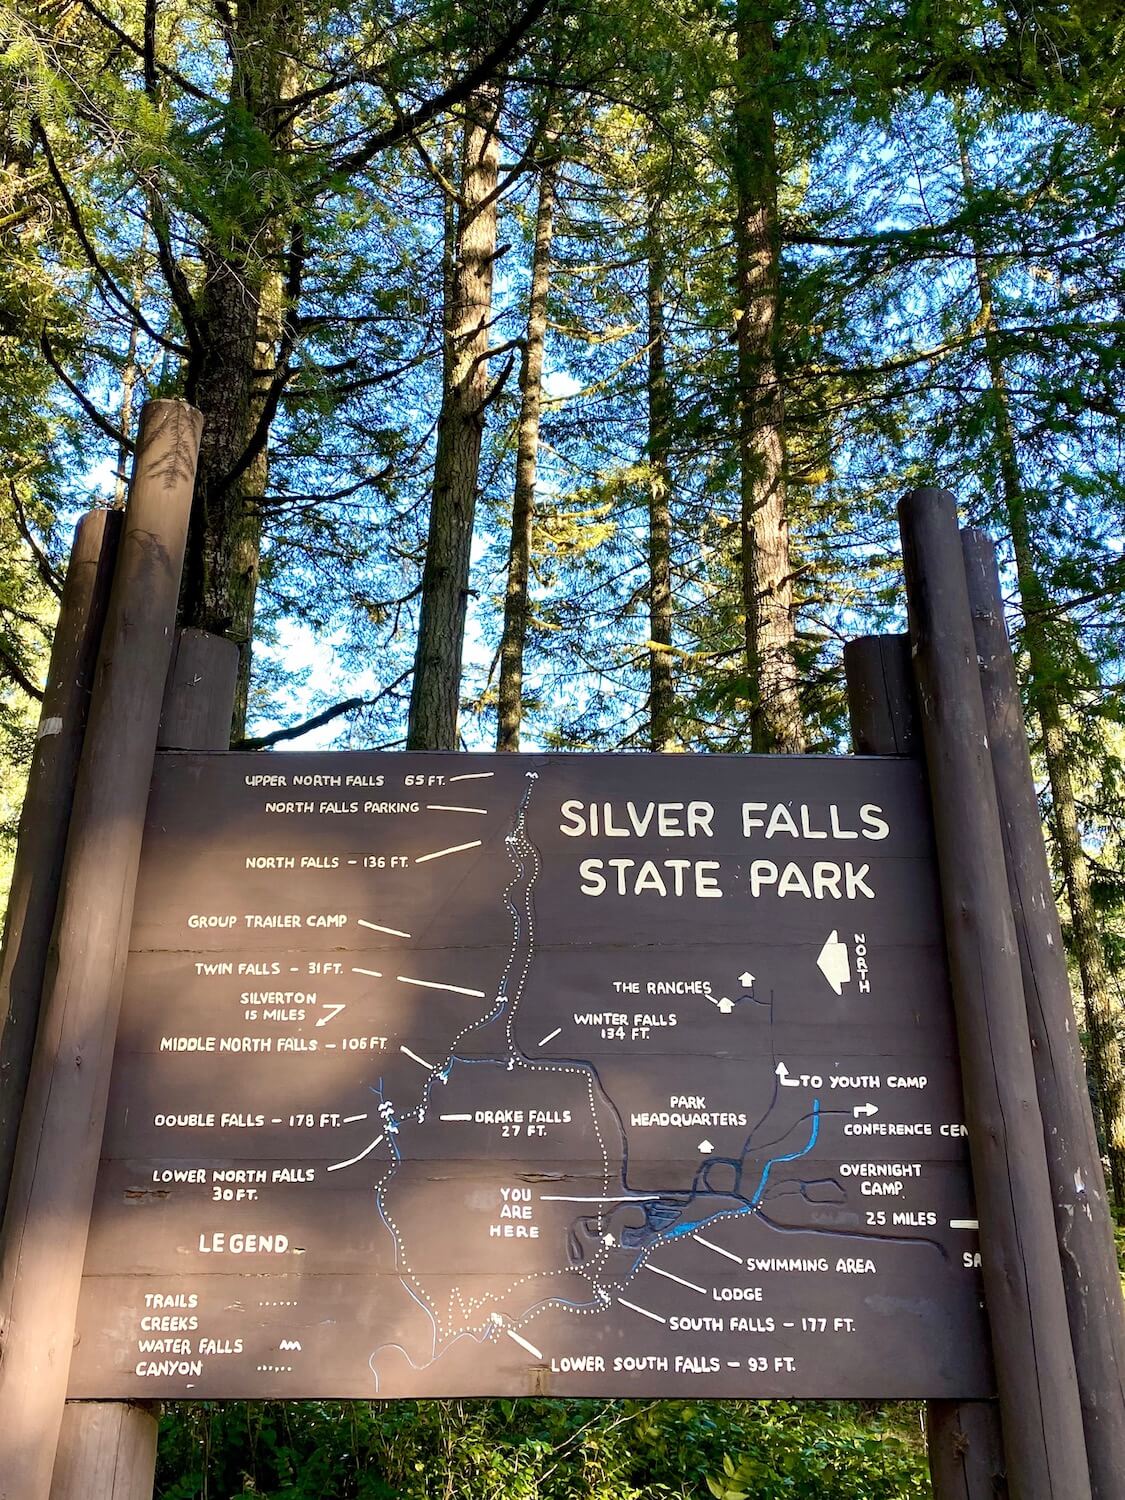 This map of Silver Falls State Park reflects the historic charm of this iconic Silver Creek Falls area.  A grouping of three logs, painted brown, support a plywood sign, also painted brown that highlights the ten waterfalls featured in the park.  The writing is in a yellow hue and outlines the various trails as well as the specific heights of the waterfalls.  In the background, mid-aged fir trees rise up to the blue sky. 